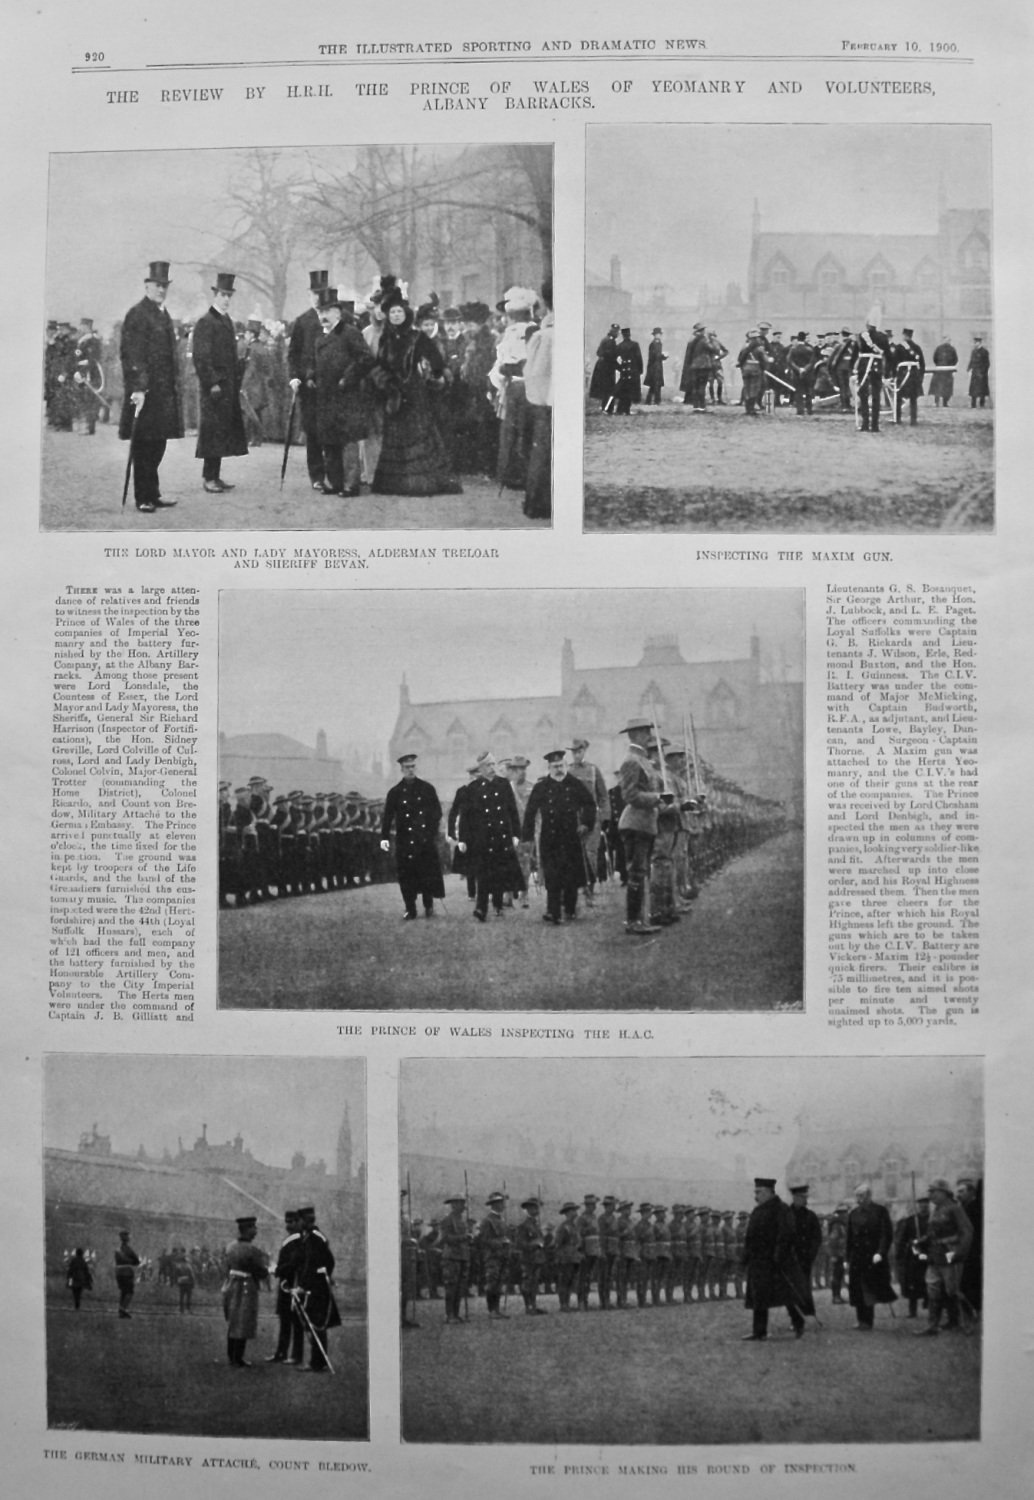 The Review by H.R.H. the Prince of Wales of Yeomanry and Volunteers, Albany